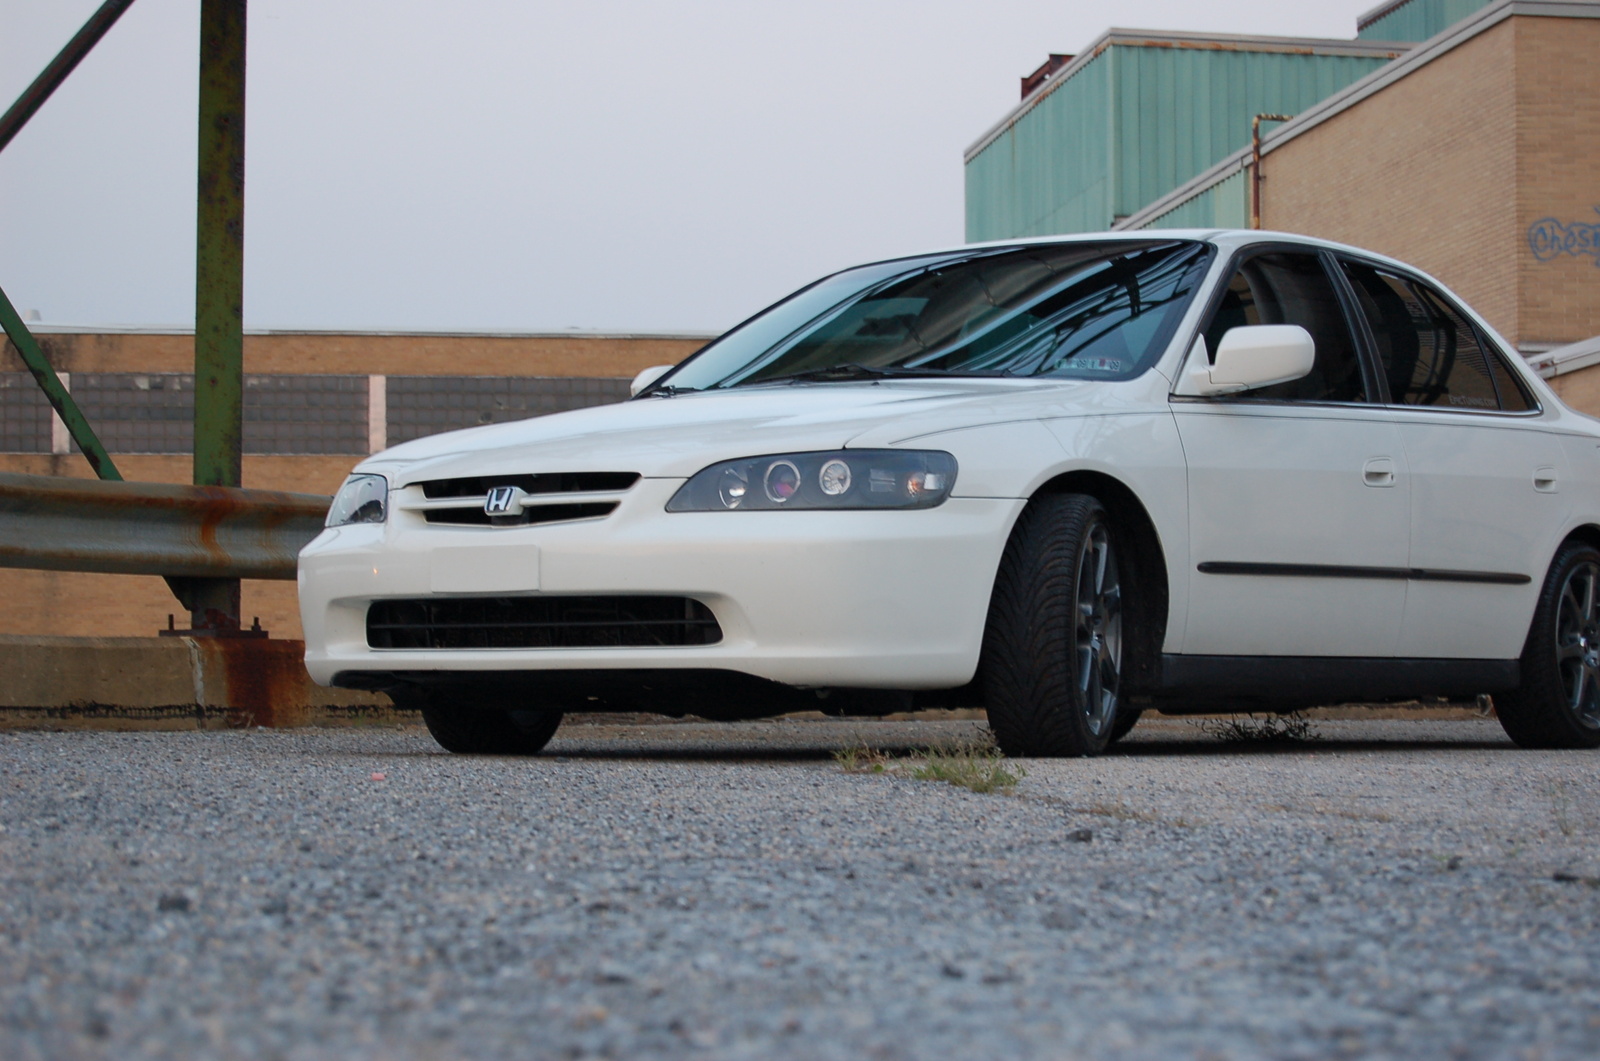 Picture of a 2000 honda accord #4